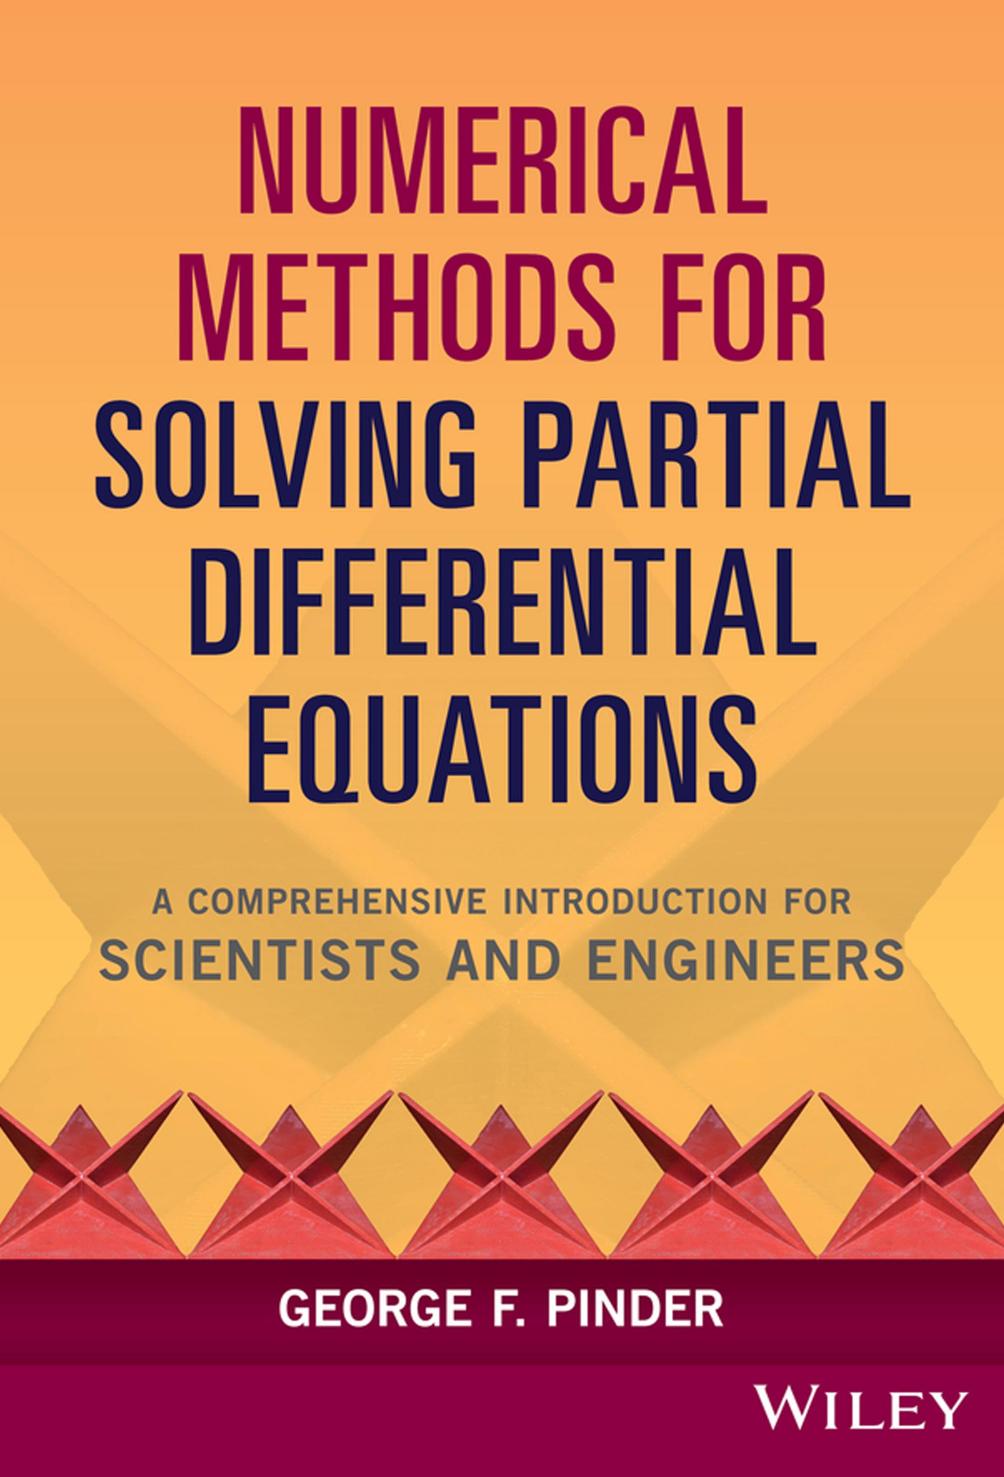 Numerical Methods for Solving Partial Differential Equations 2018.pdf